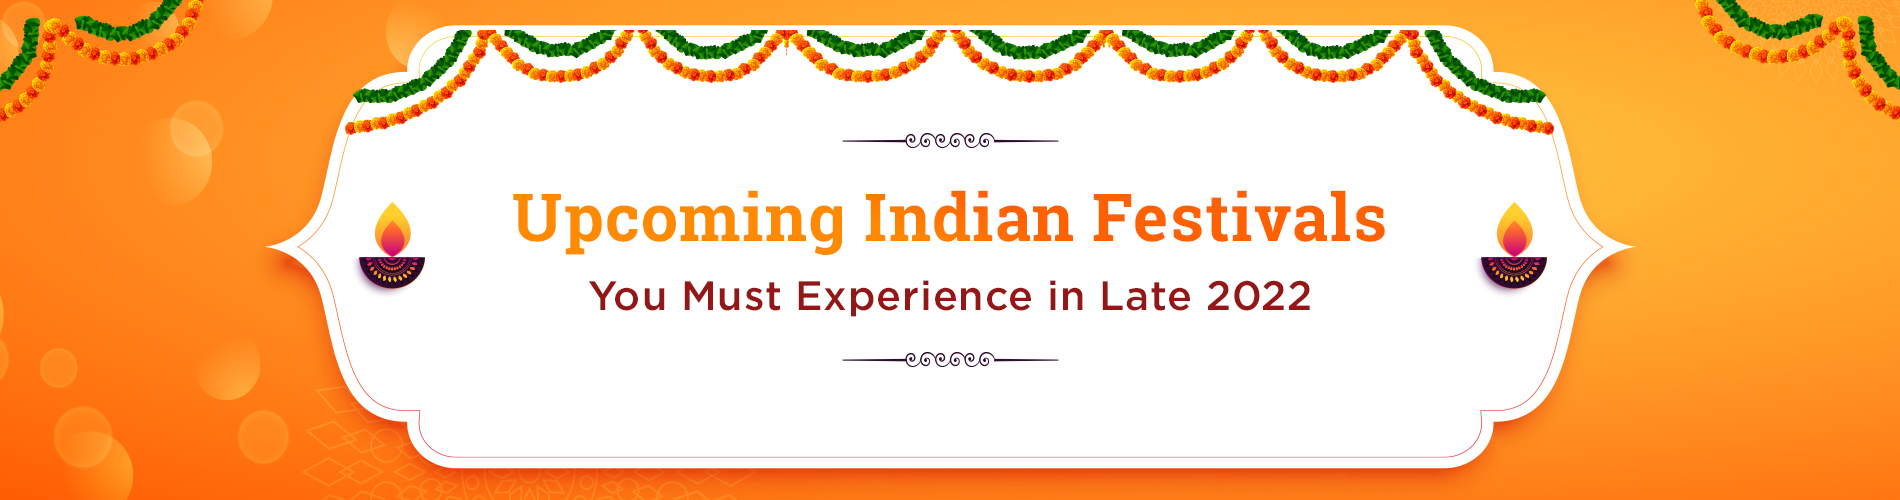 Upcoming Indian Festivals You Must Experience in Late 2022 